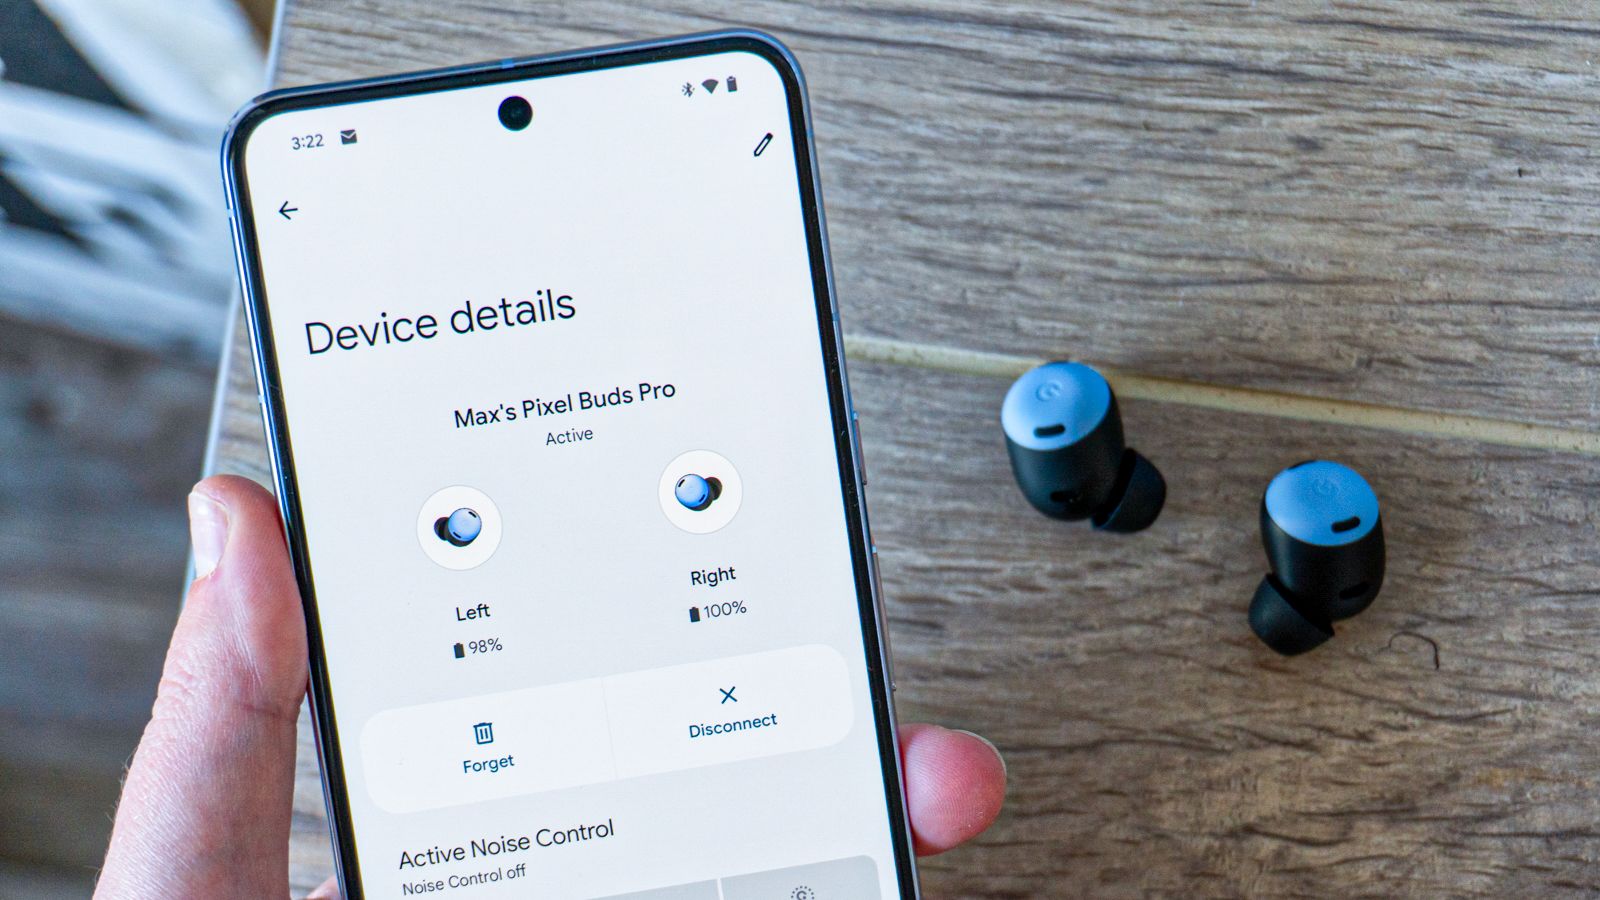 Google Pixel Buds A Review: All About Smarts - Tech Advisor